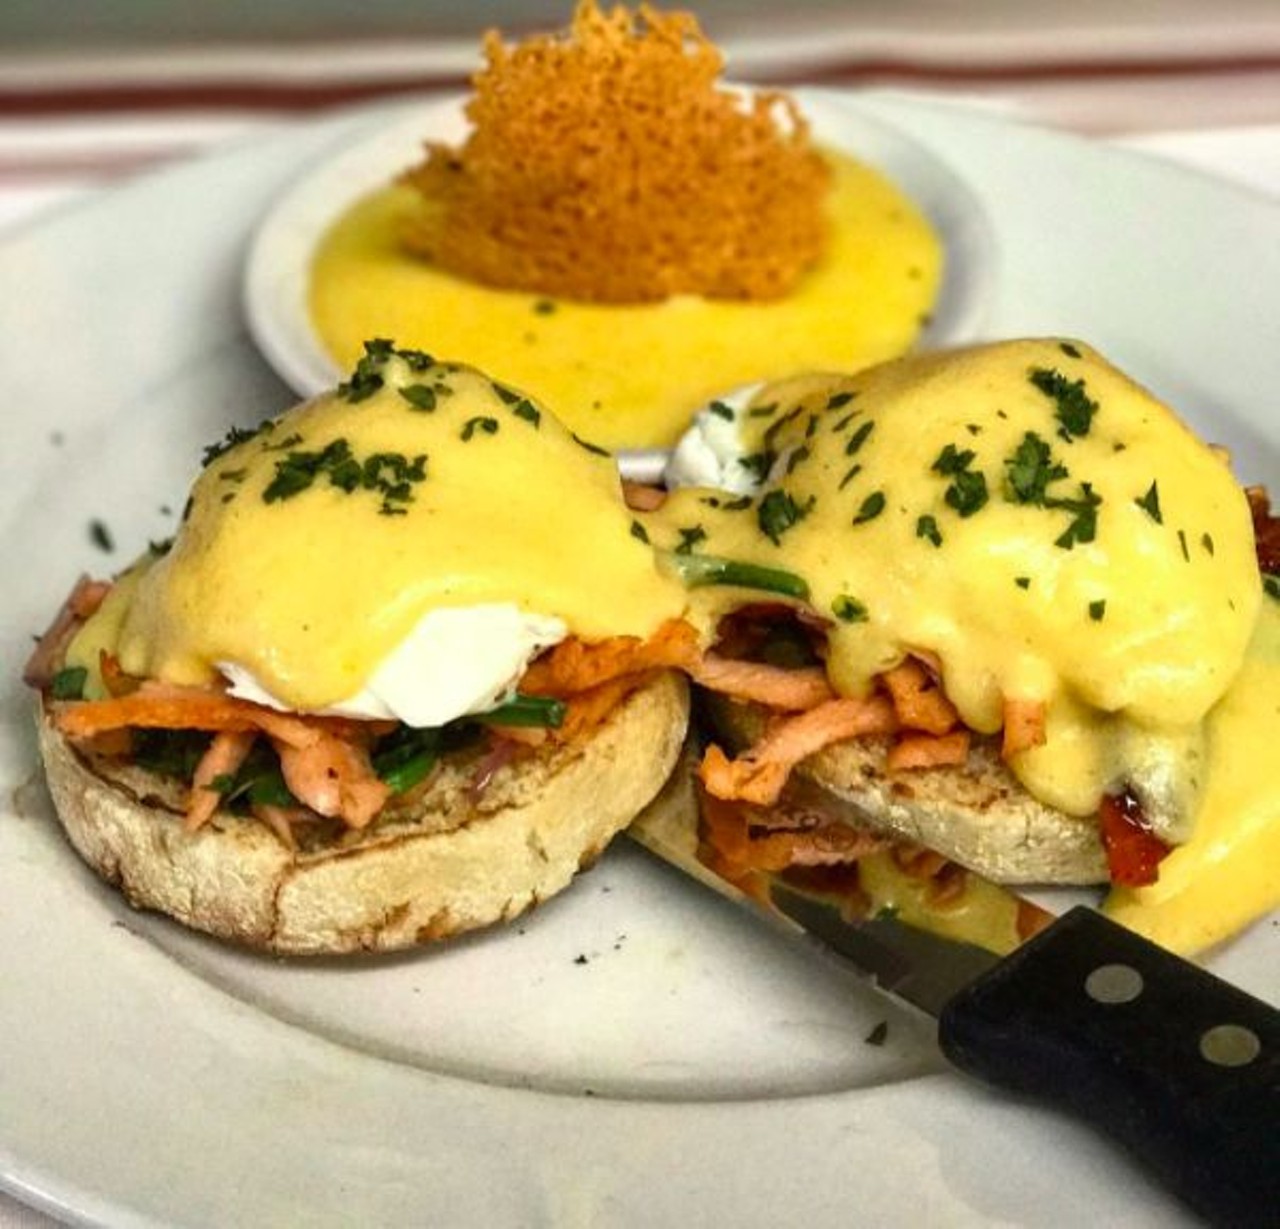 Toast
23144 Woodward Ave, Ferndale, MI 48220
One of Metro Detroit&#146;s finest brunch spots, this menu offers creative breakfast and lunch options. A few popular dishes include the Faroe scrambler, corned-beef hash, and the Chicken-n-waffle Benny.
(Photo courtesy of @toastinferndale)